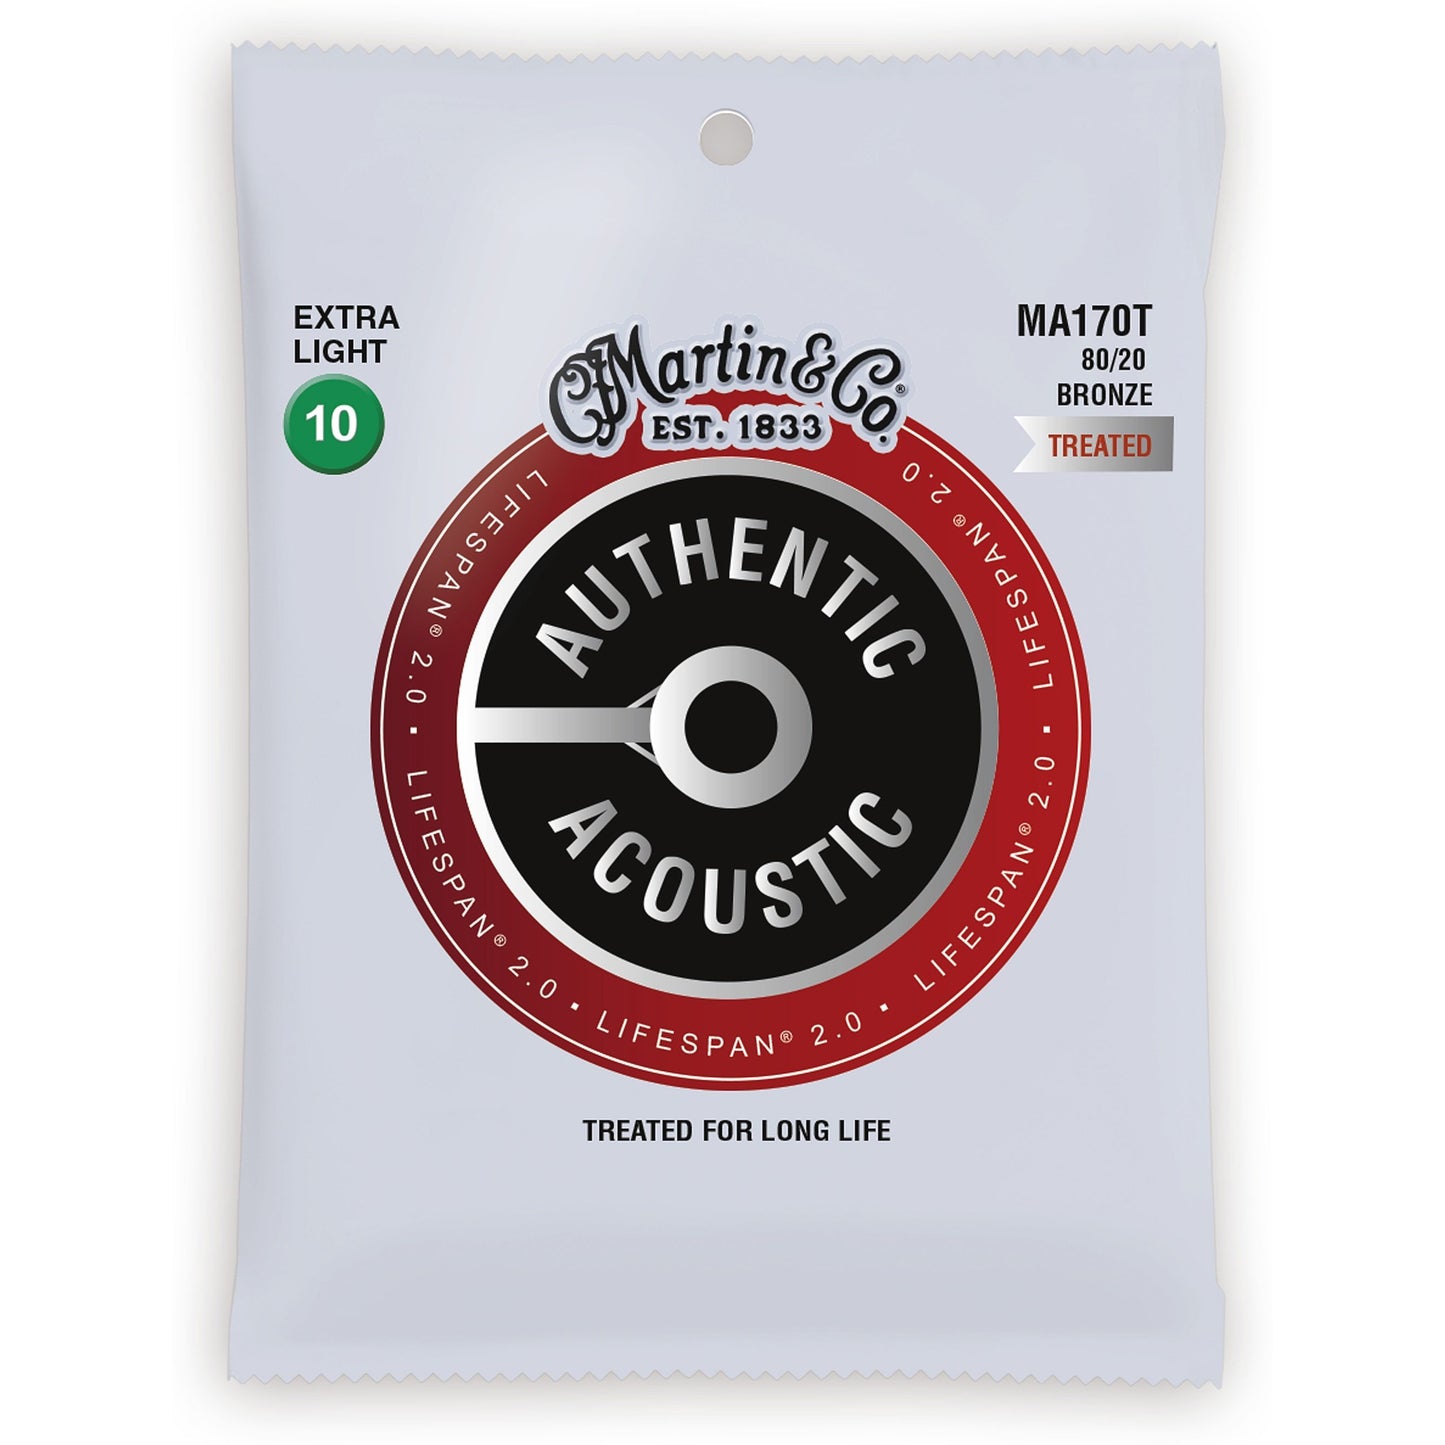 Martin Authentic Lifespan 2.0 Treated 80/20 Bronze Acoustic Guitar Strings, MA170T, Extra Light